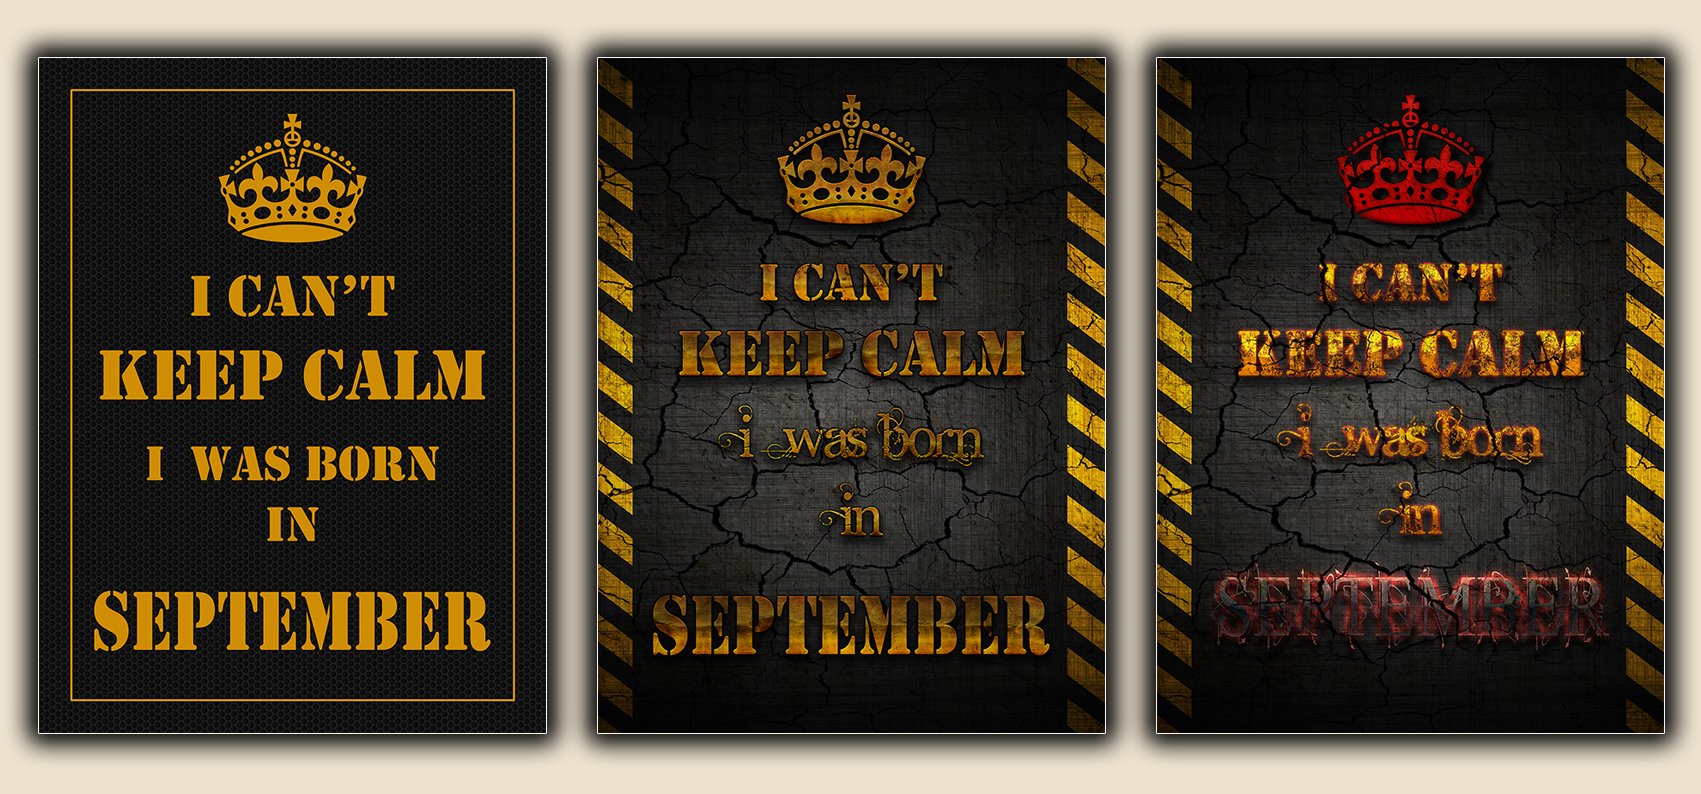 I Can't Keep Calm - I was Born in September